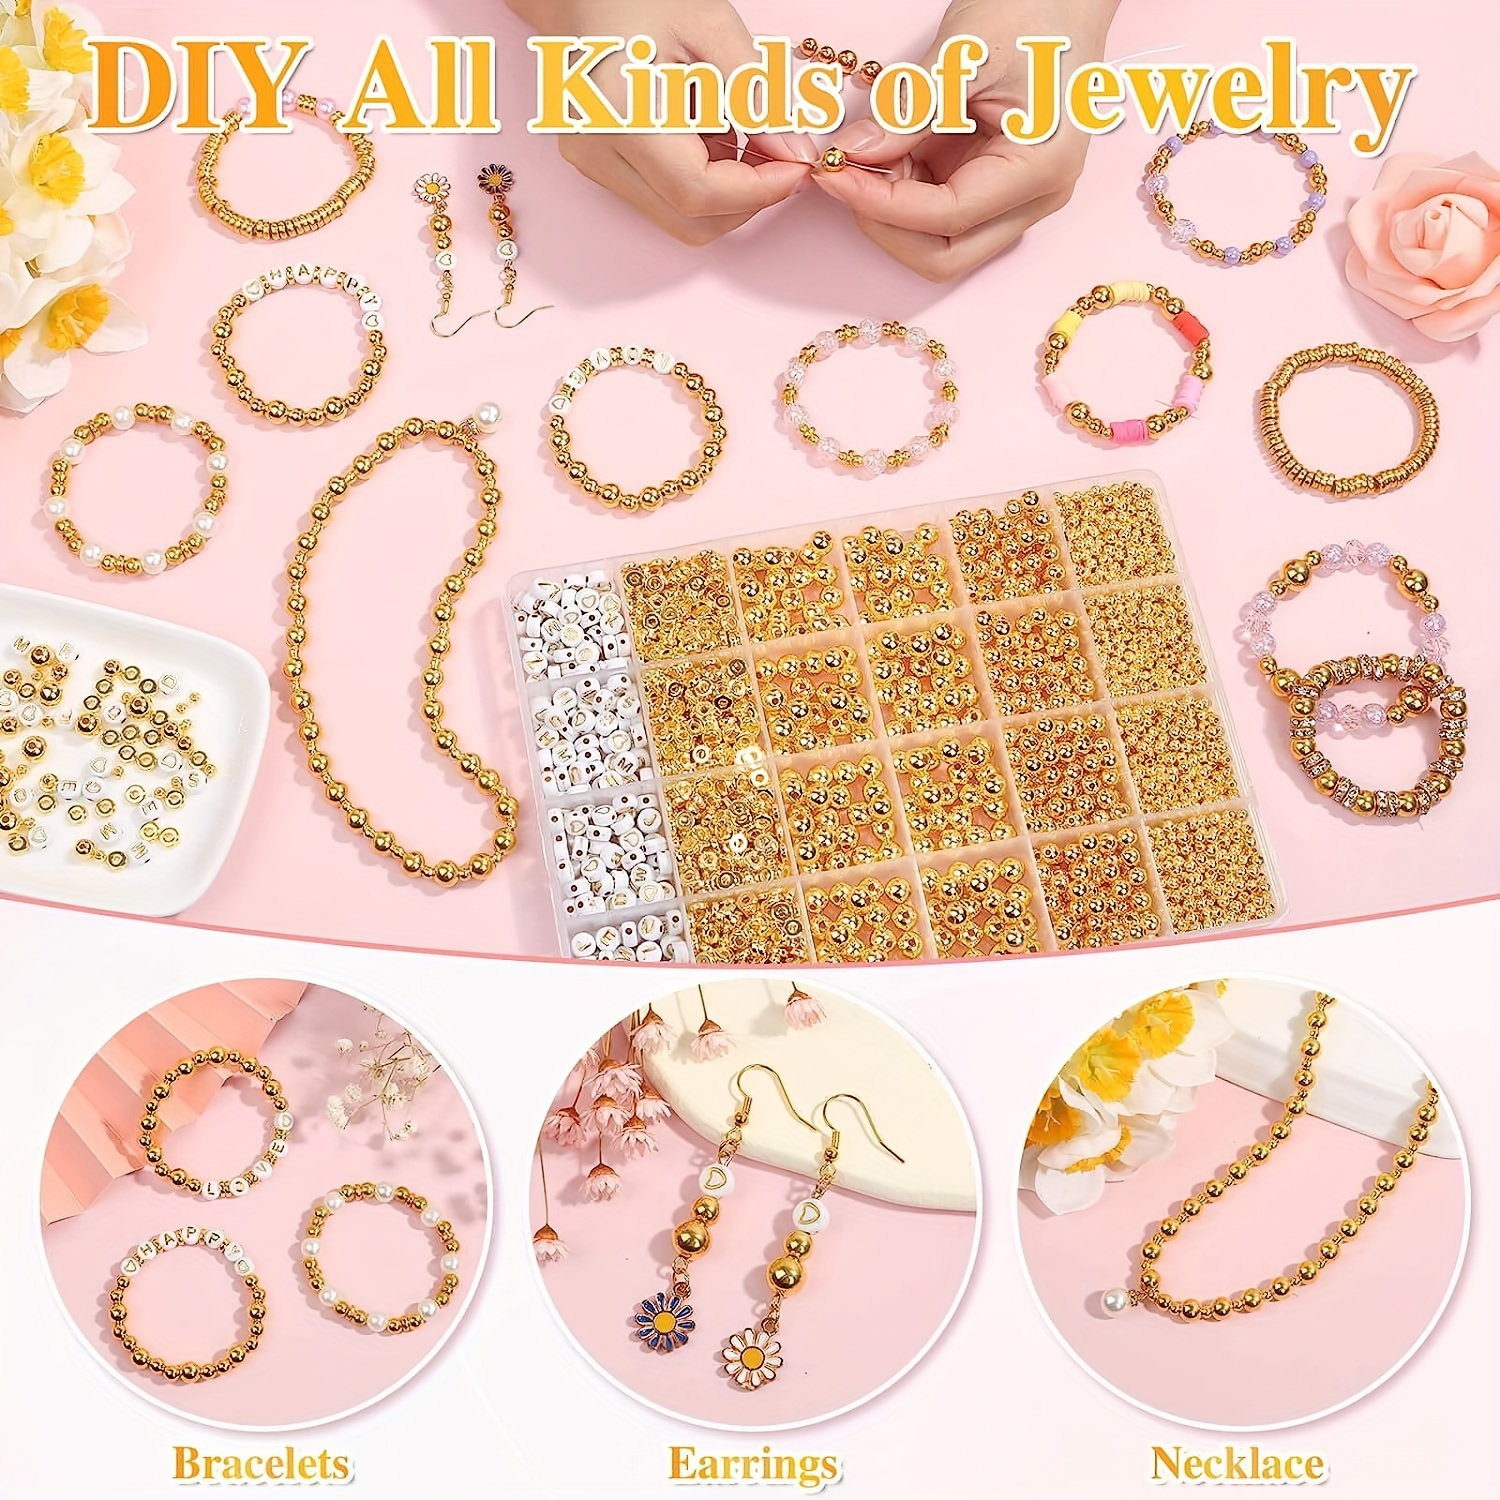 2240 Pieces Spacer Beads for Jewelry Making in 8 Styles, Assorted Gold  Beads For Bracelets Making, Round beads Flat beads Star beads Bracelet  spacers